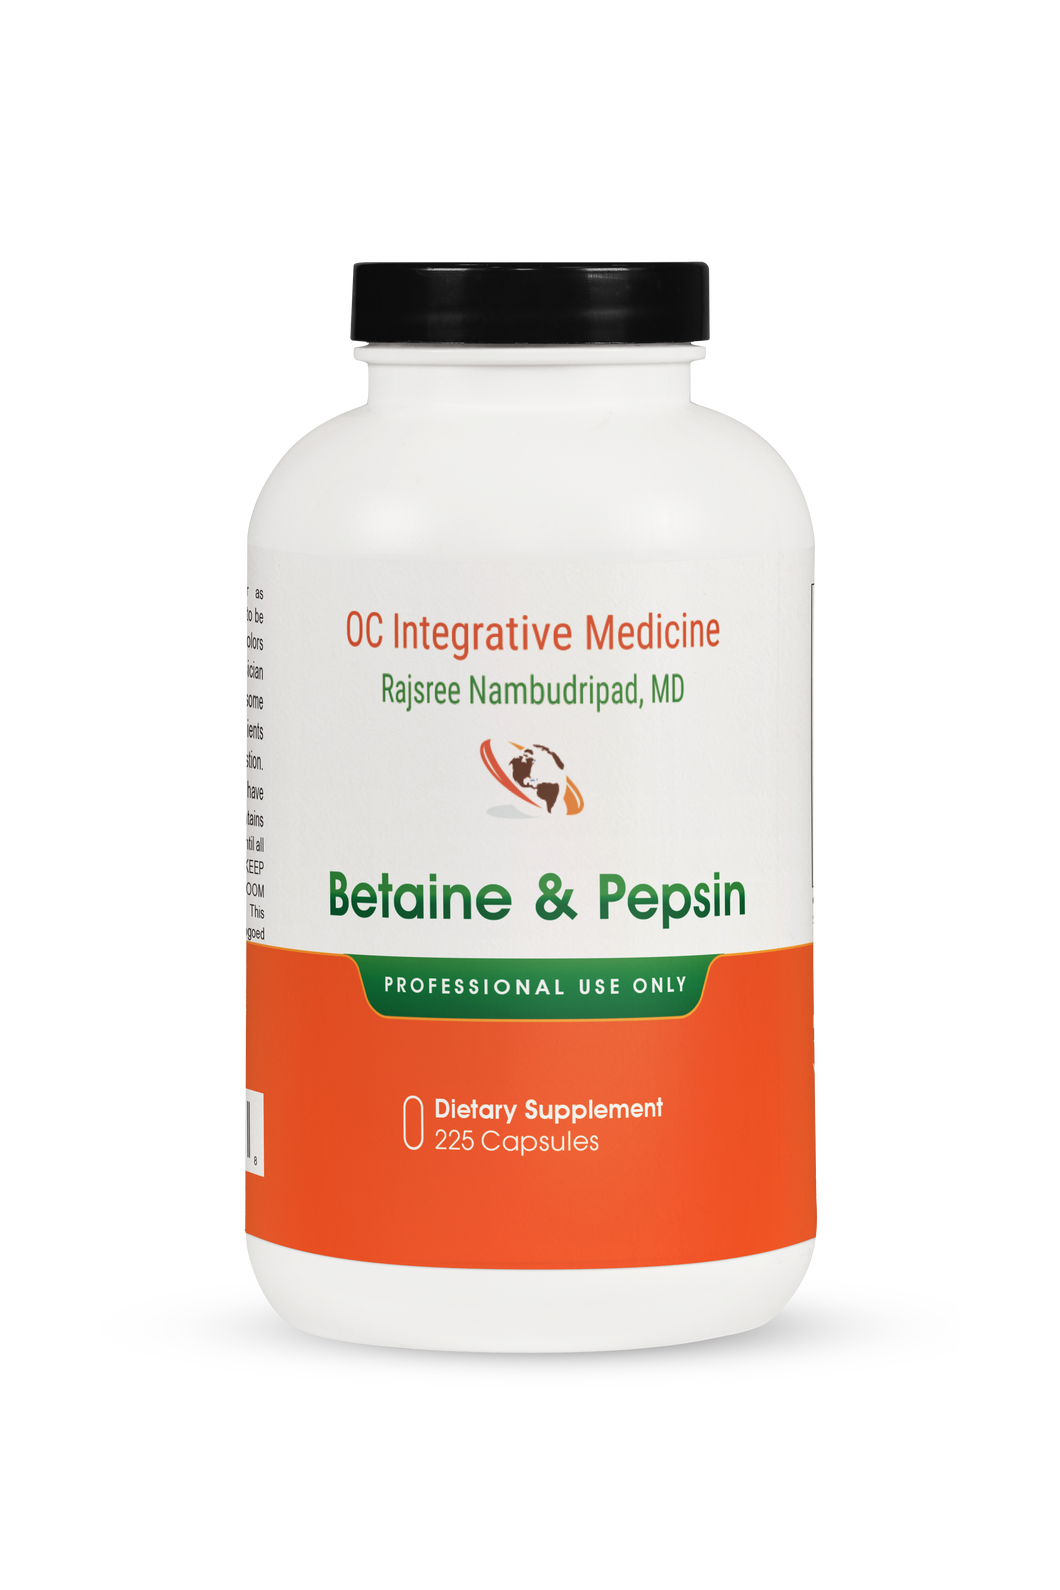 Betaine and Pepsin